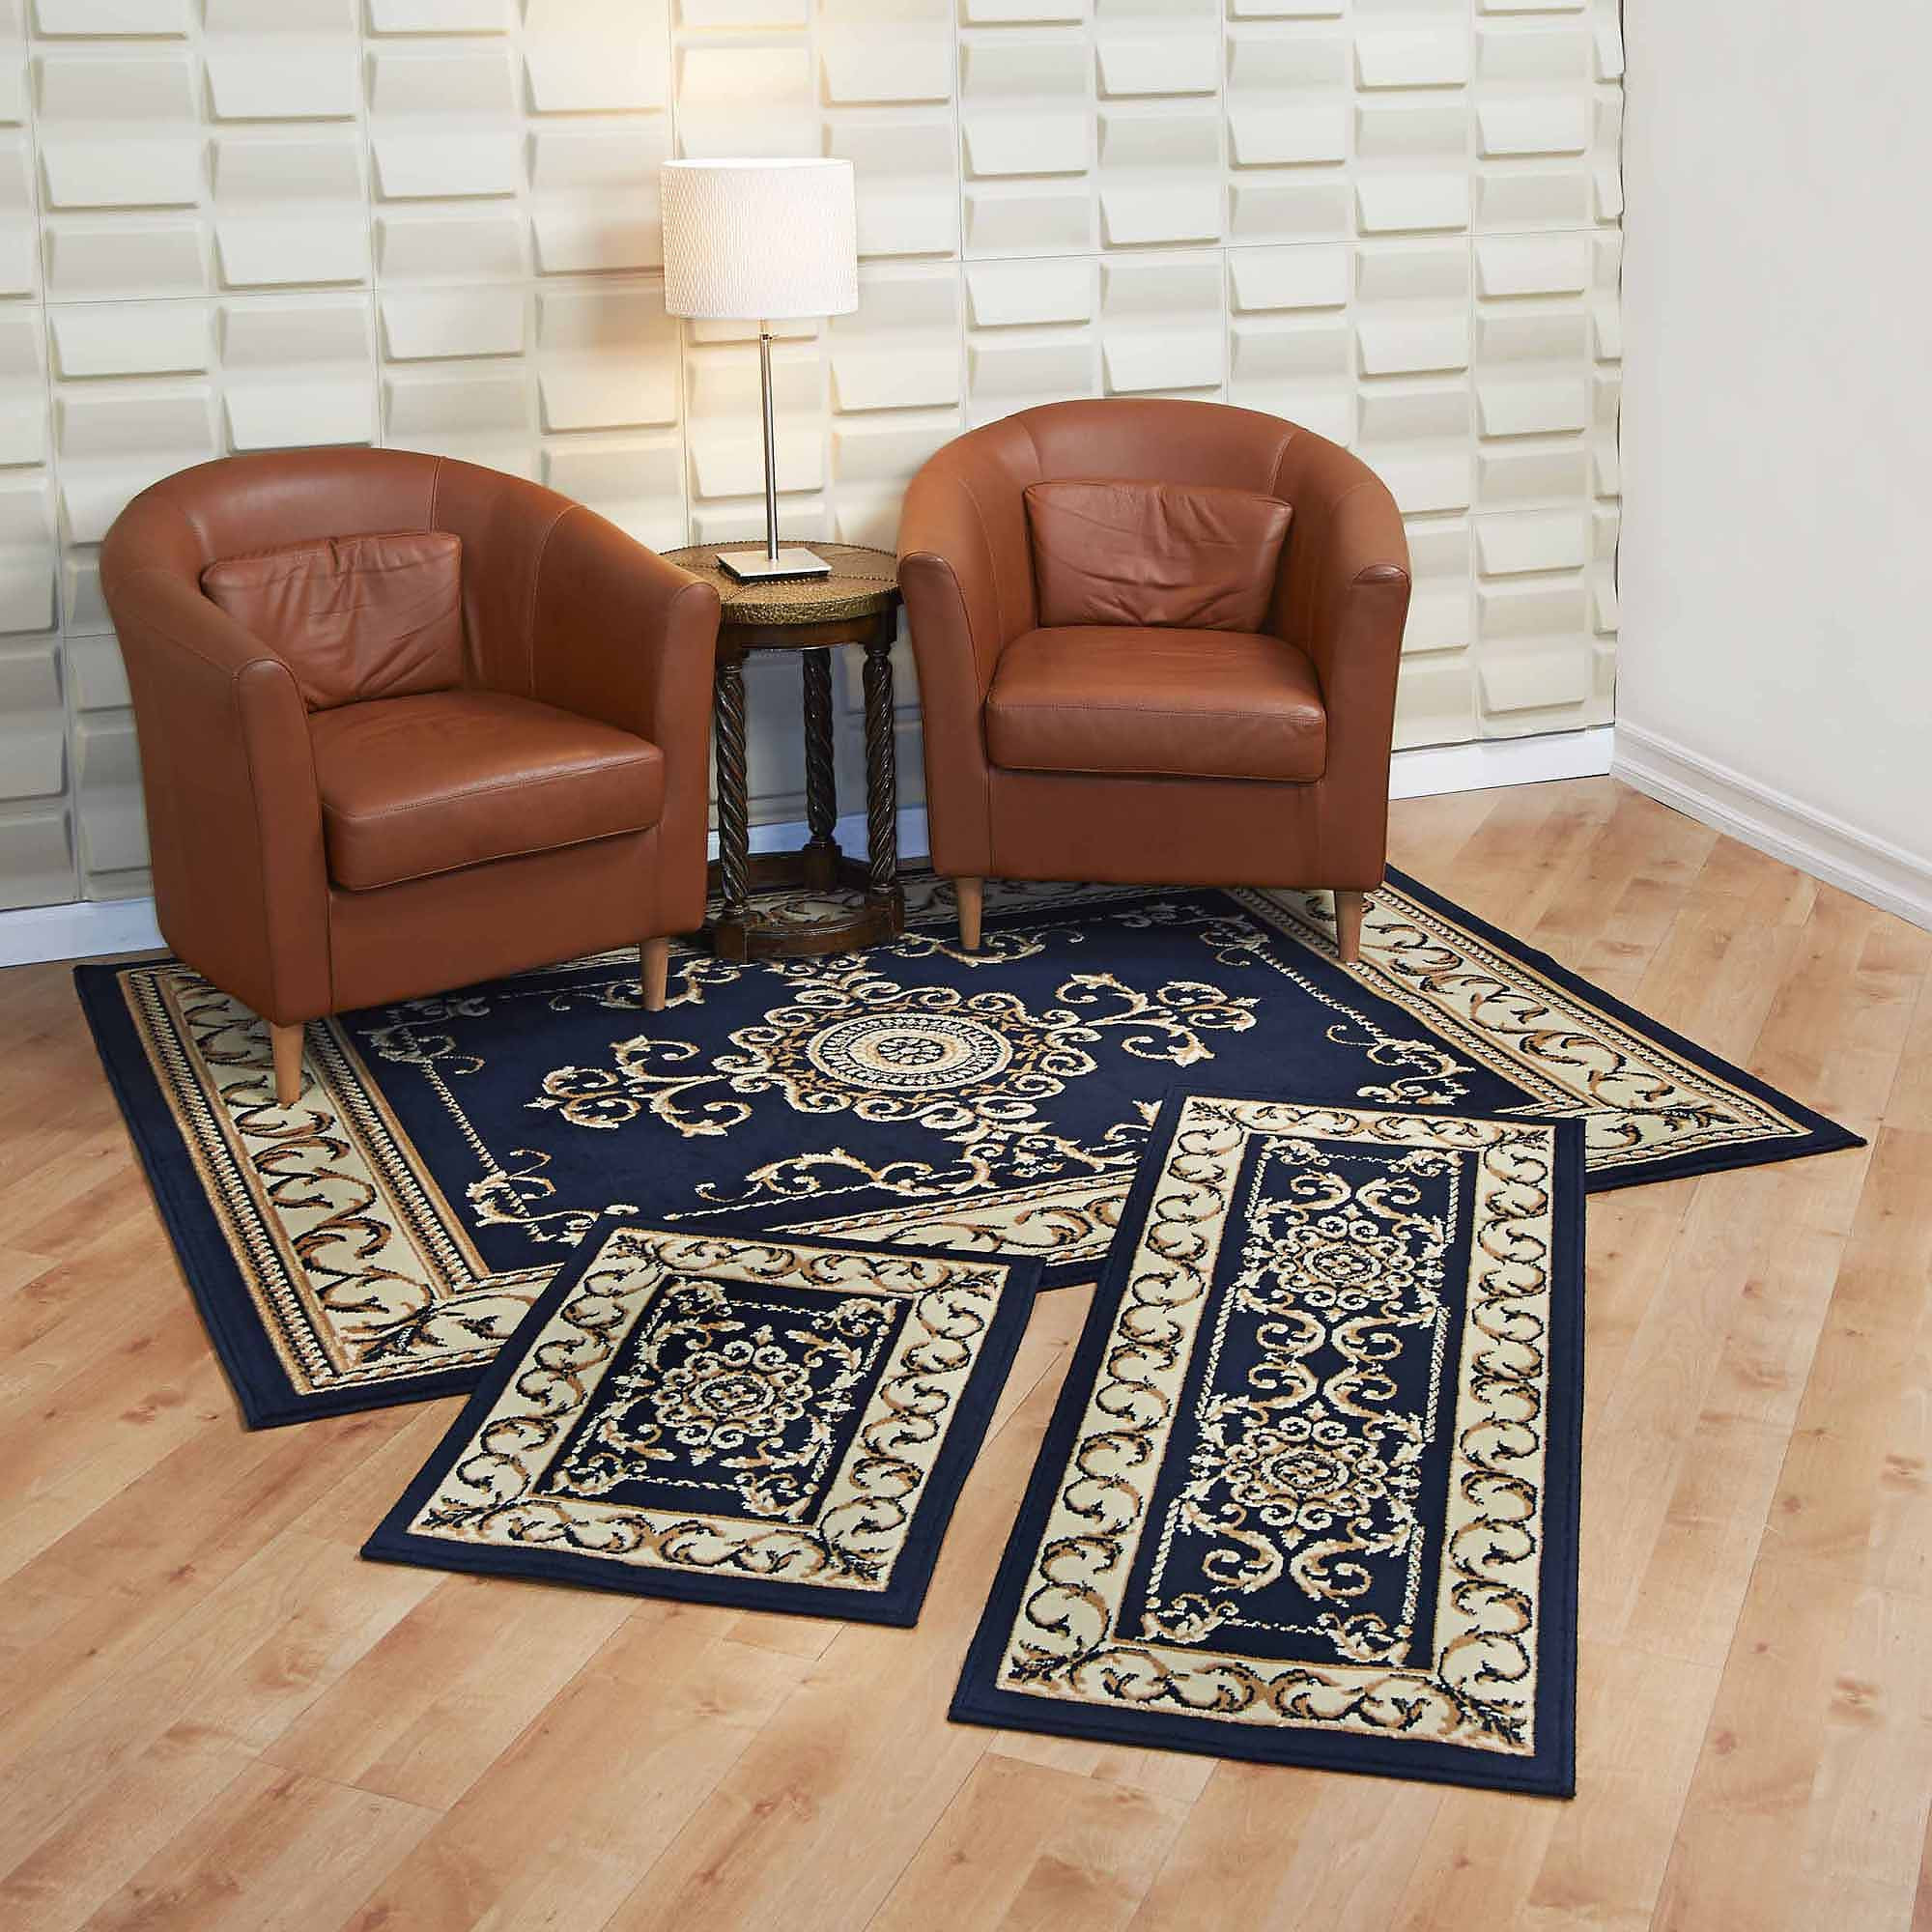 Living Room Rug Sets
 Navy Blue And Beige Area Rugs Rugs Ideas